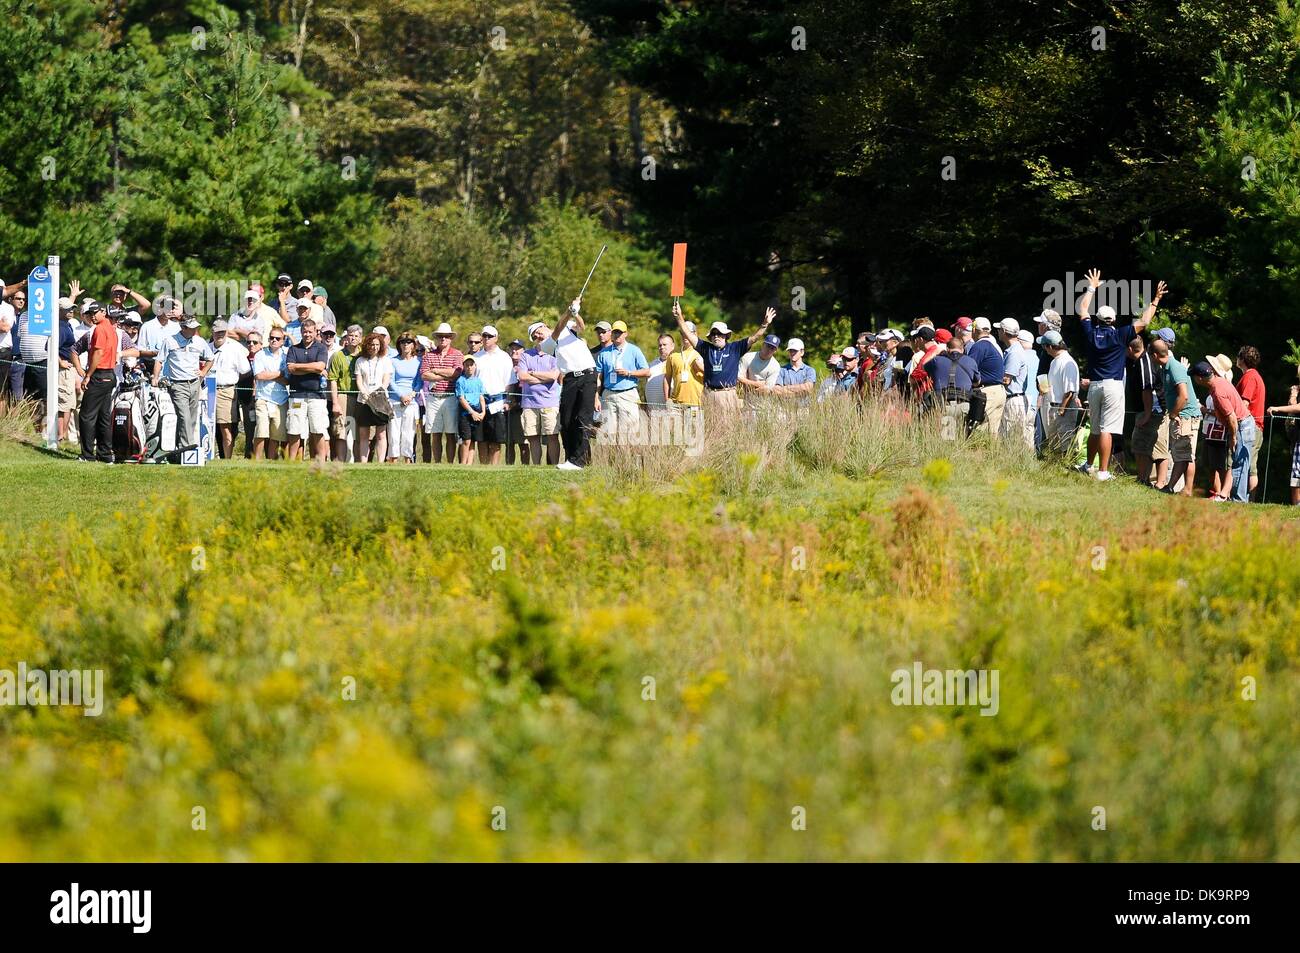 Sept. 2, 2011 - Norton, Massachusetts, U.S - Fans watch as local favorite Keegan Bradley hits his tee shot on the third hole during the first round at the Deutsche Bank Championship at the TPC Boston. (Credit Image: © Geoff Bolte/Southcreek Global/ZUMAPRESS.com) Stock Photo